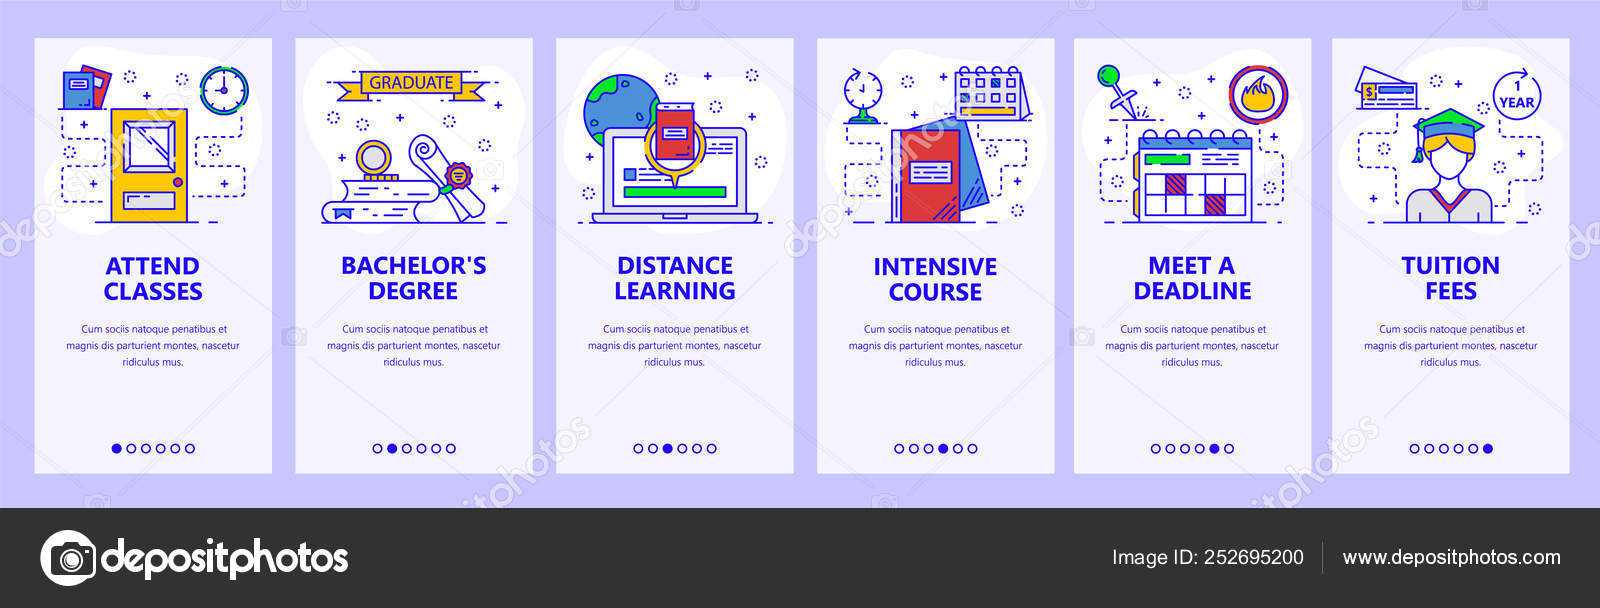 Mobile App Onboarding Screens. School And College Education Within College Banner Template